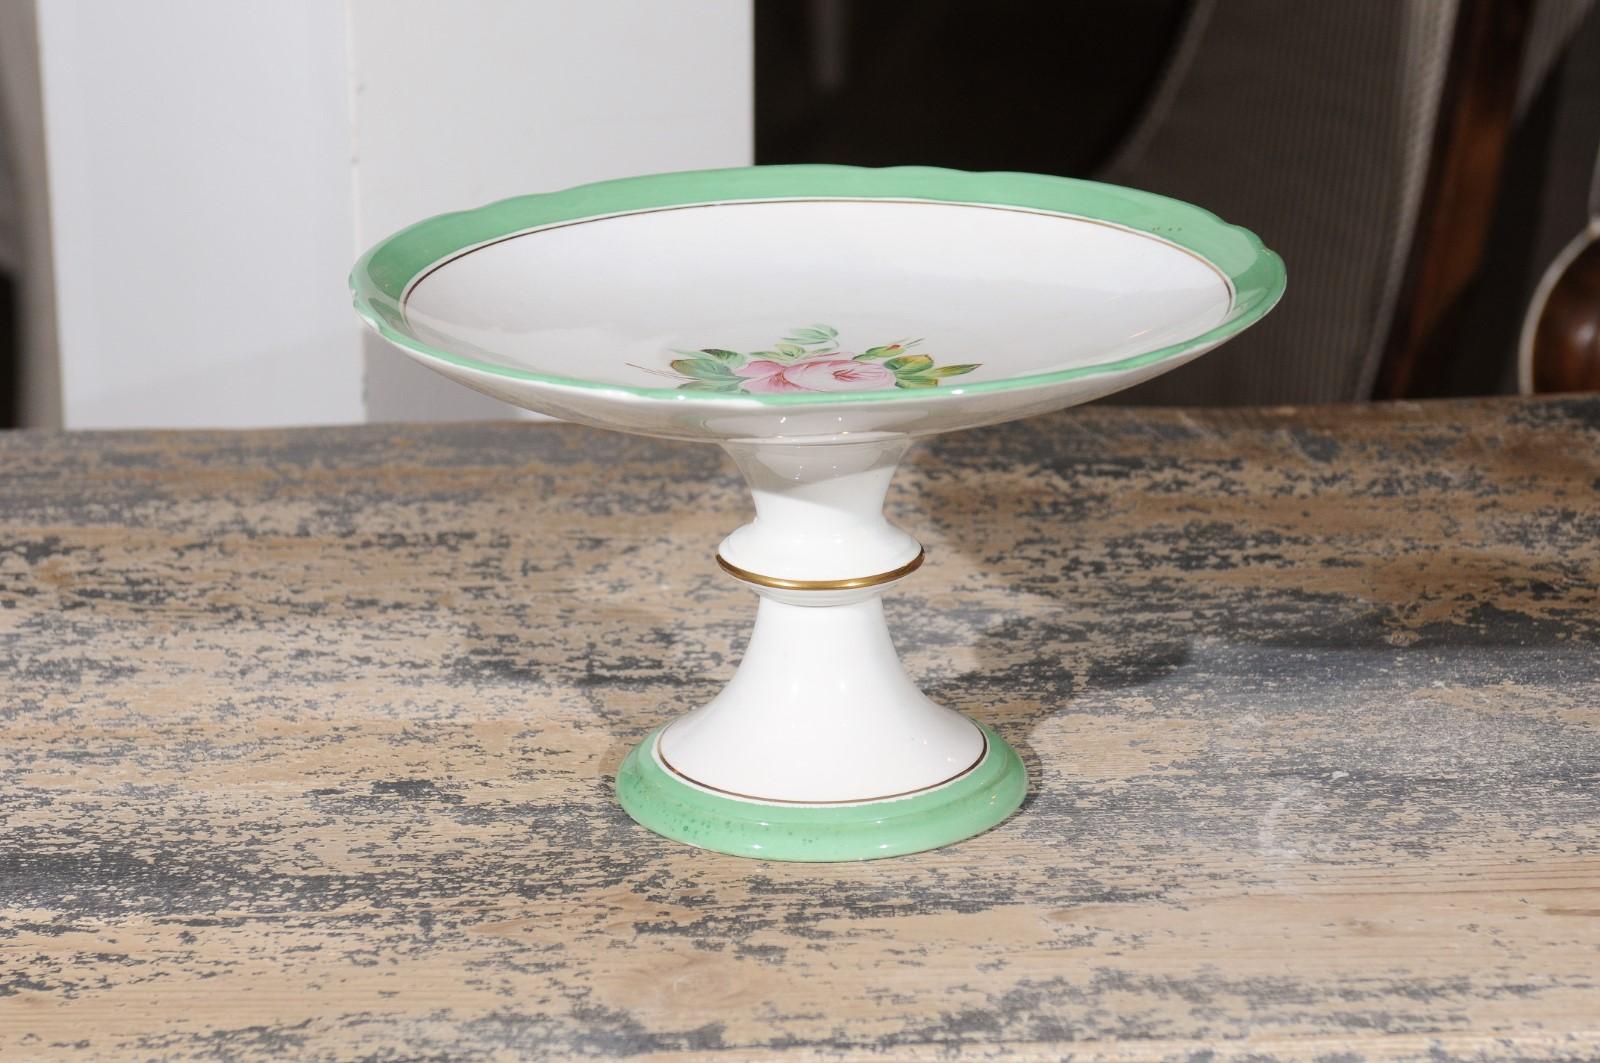 An English Victorian botanical compote from the late 19th century, with pink roses, green and gold trim and hourglass-shaped base. Born in England during Queen Victoria's later years, this charming compote features a delicate central rose surrounded